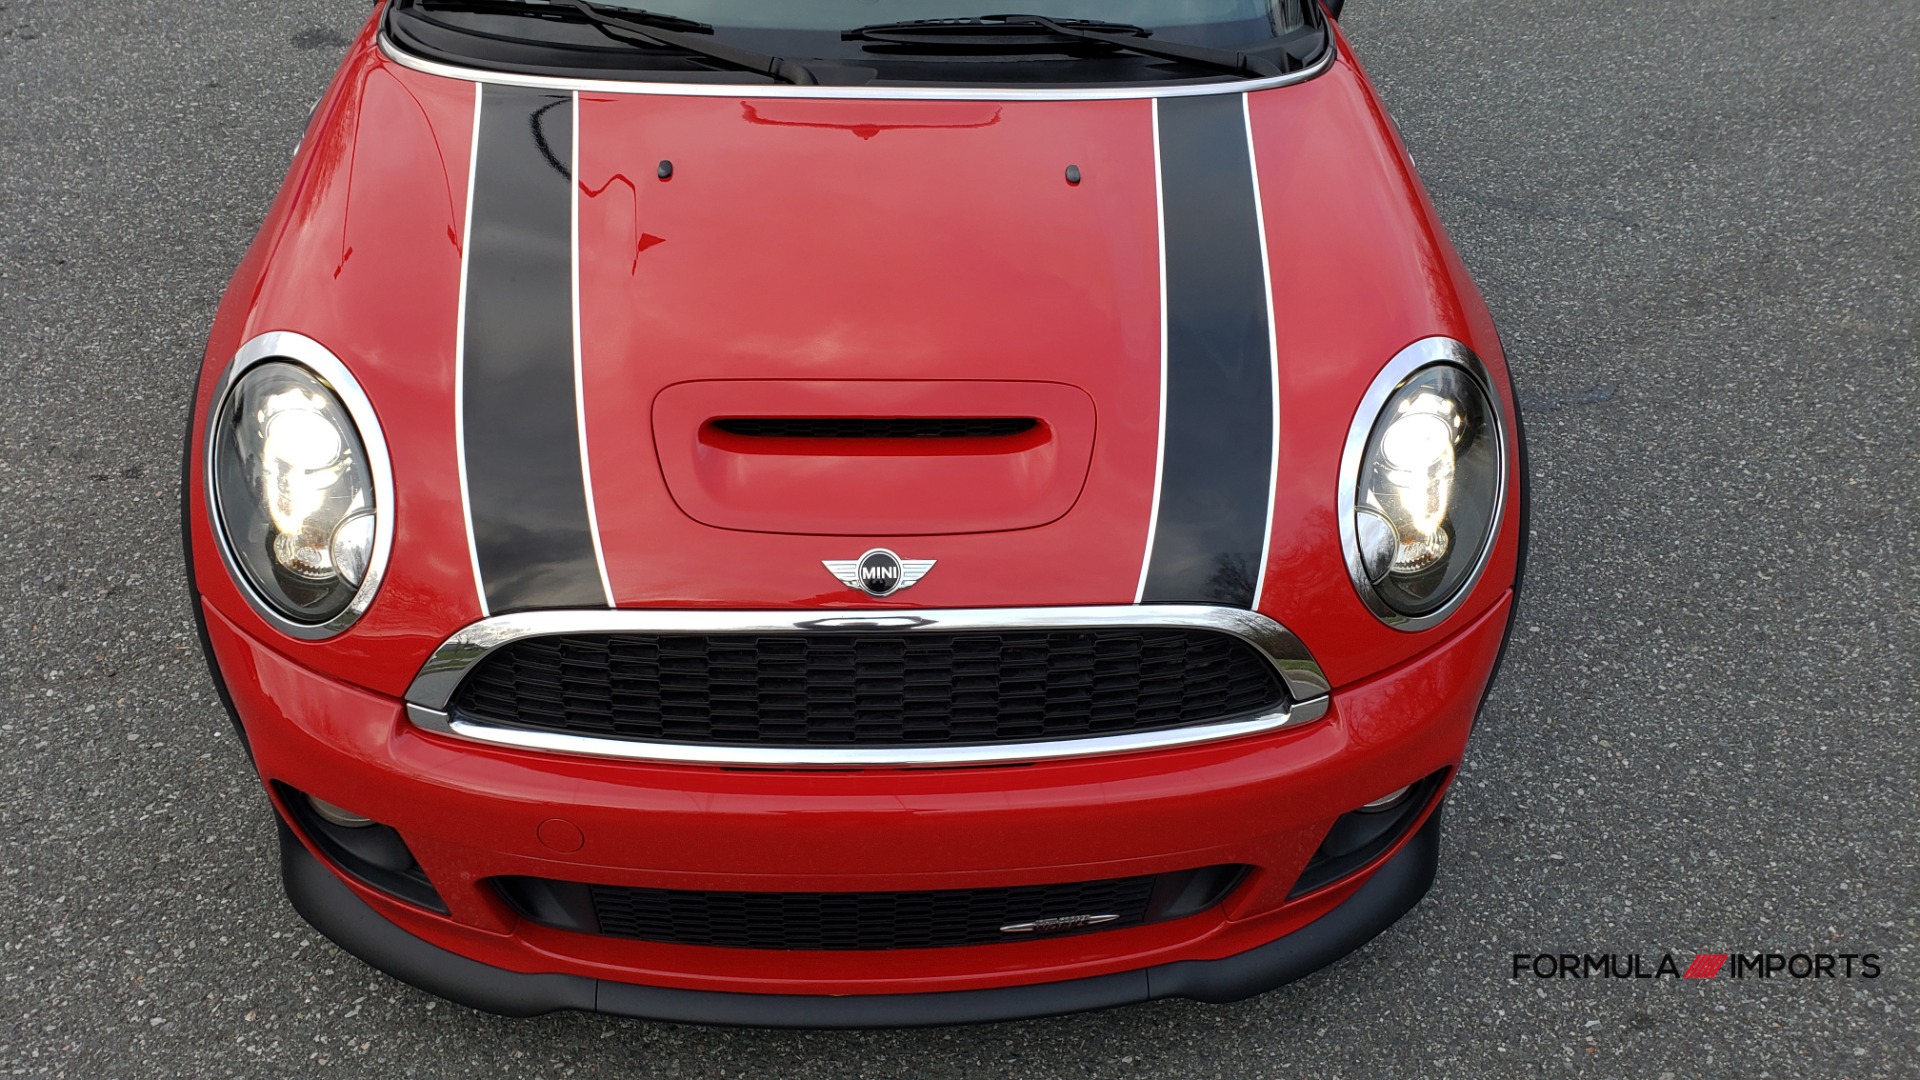 Used 2012 MINI COOPER JOHN COOPER WORKS CONVERTIBLE for sale Sold at Formula Imports in Charlotte NC 28227 22